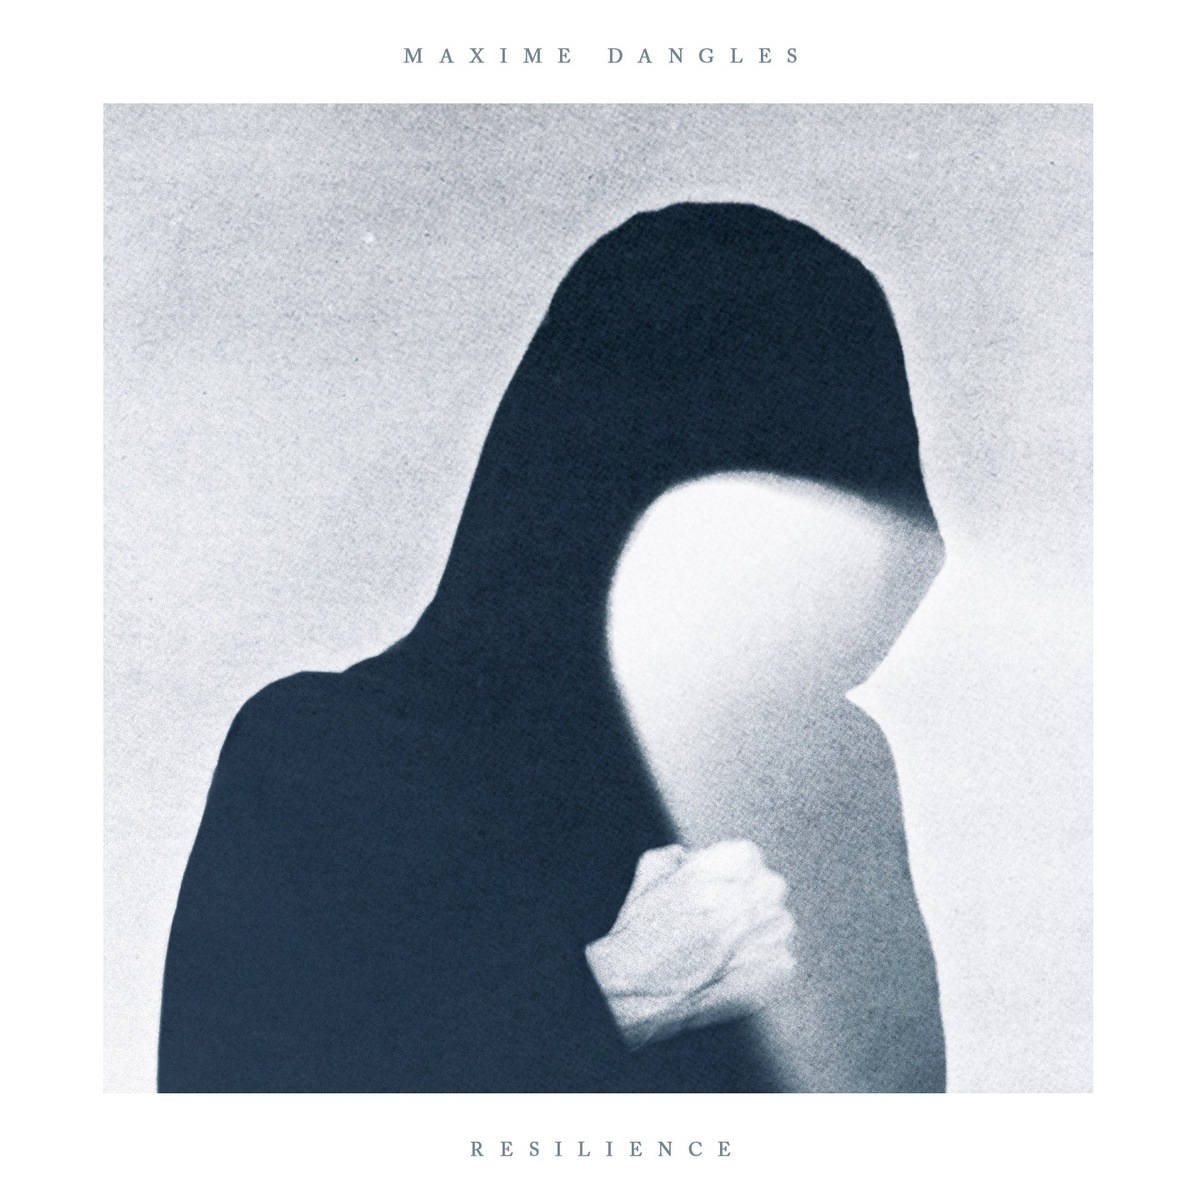 Maxime Dangles – Resilience LP